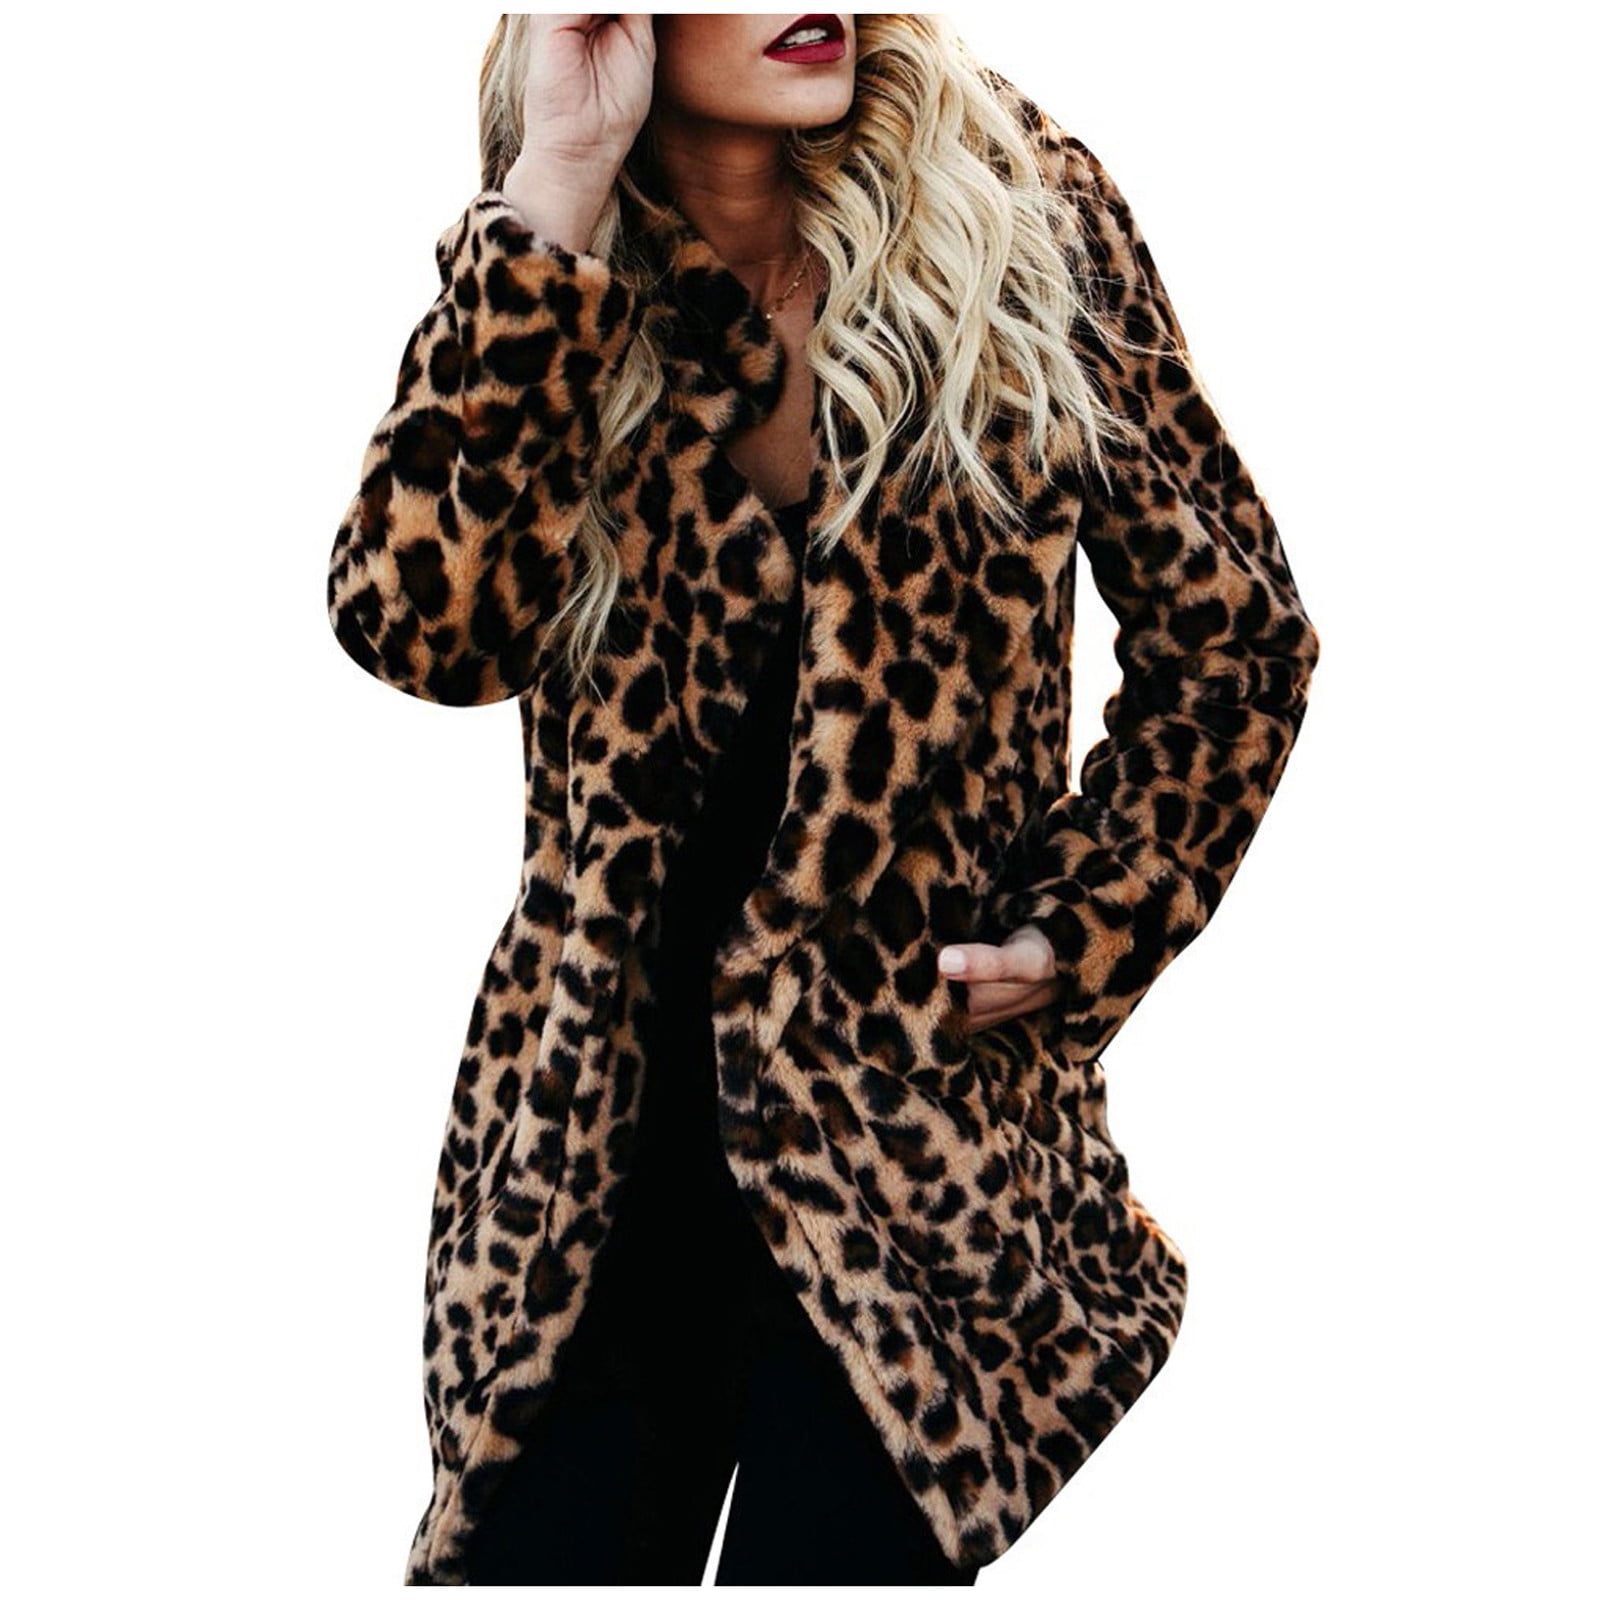 Animal leopard print super soft Faux fur oversized gilet coat with hoody 